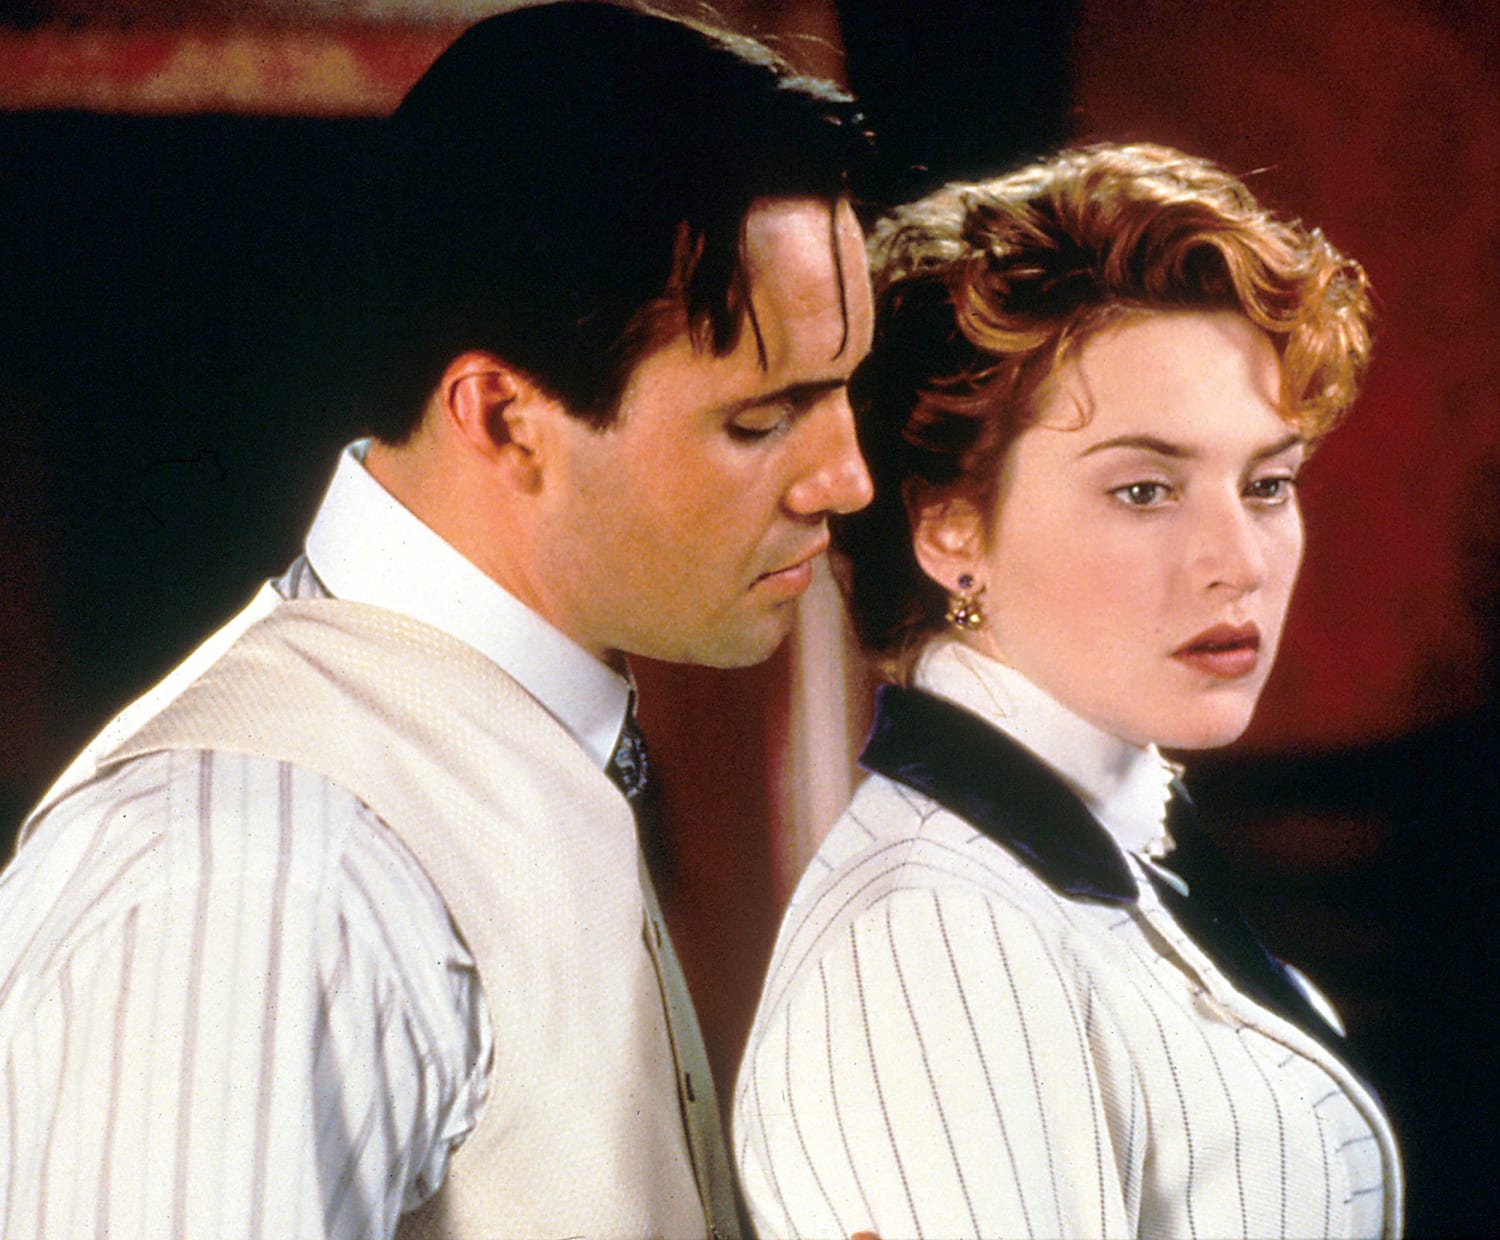 Hear Billy Zane stick up for the snooty villain he played in 'Titanic'